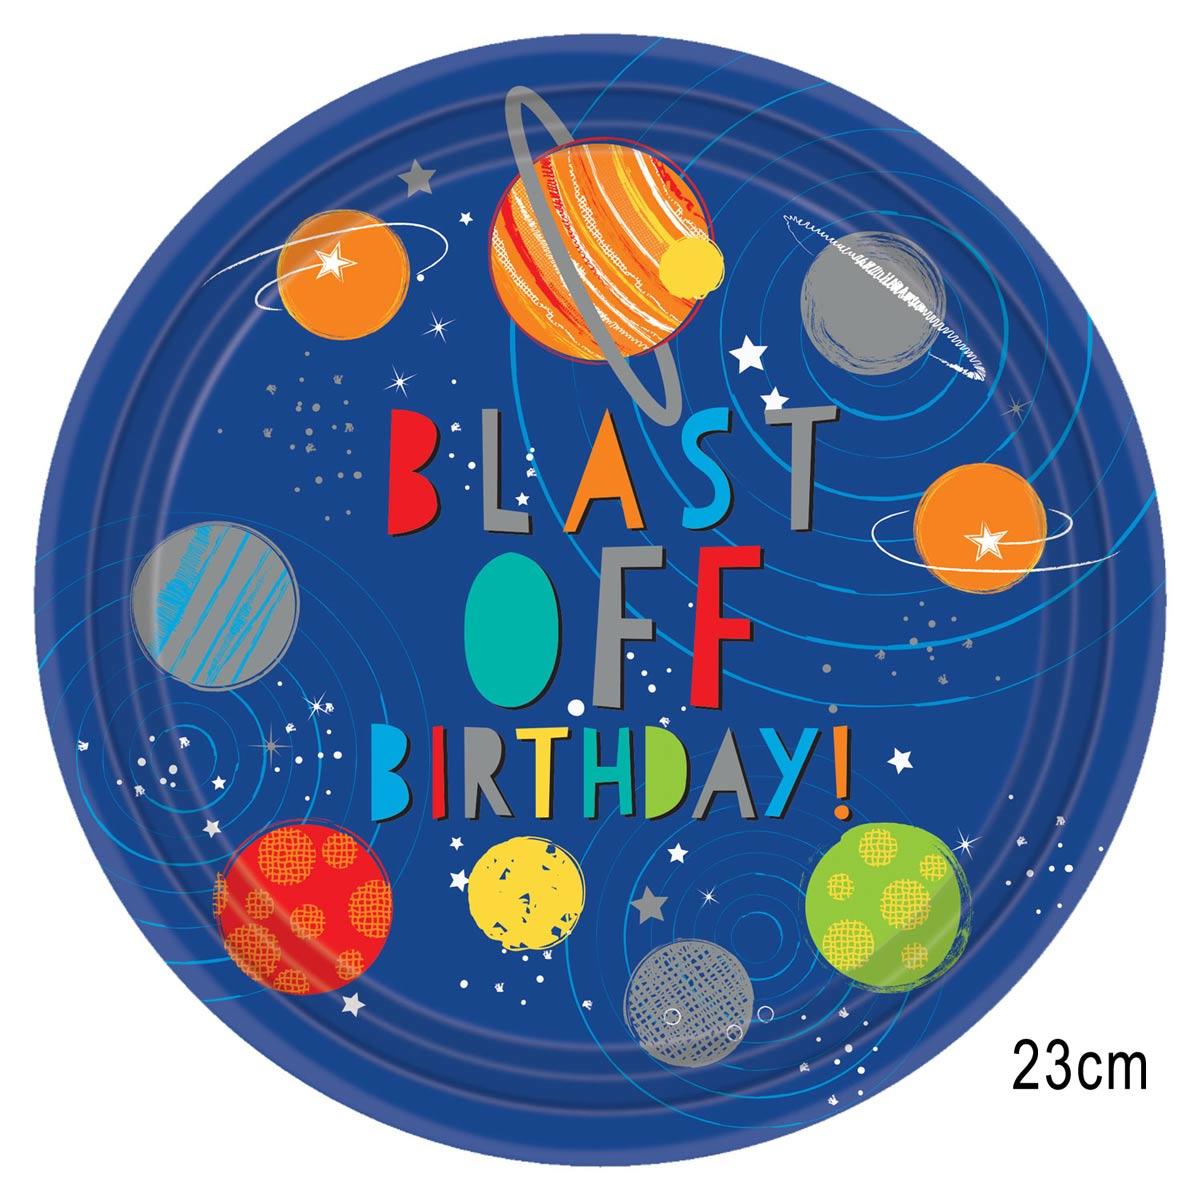 Pk 8 Blast Off Birthday Paper Plates 23cm by Amscan 9904653 available here at Karnival Costumes online party shop